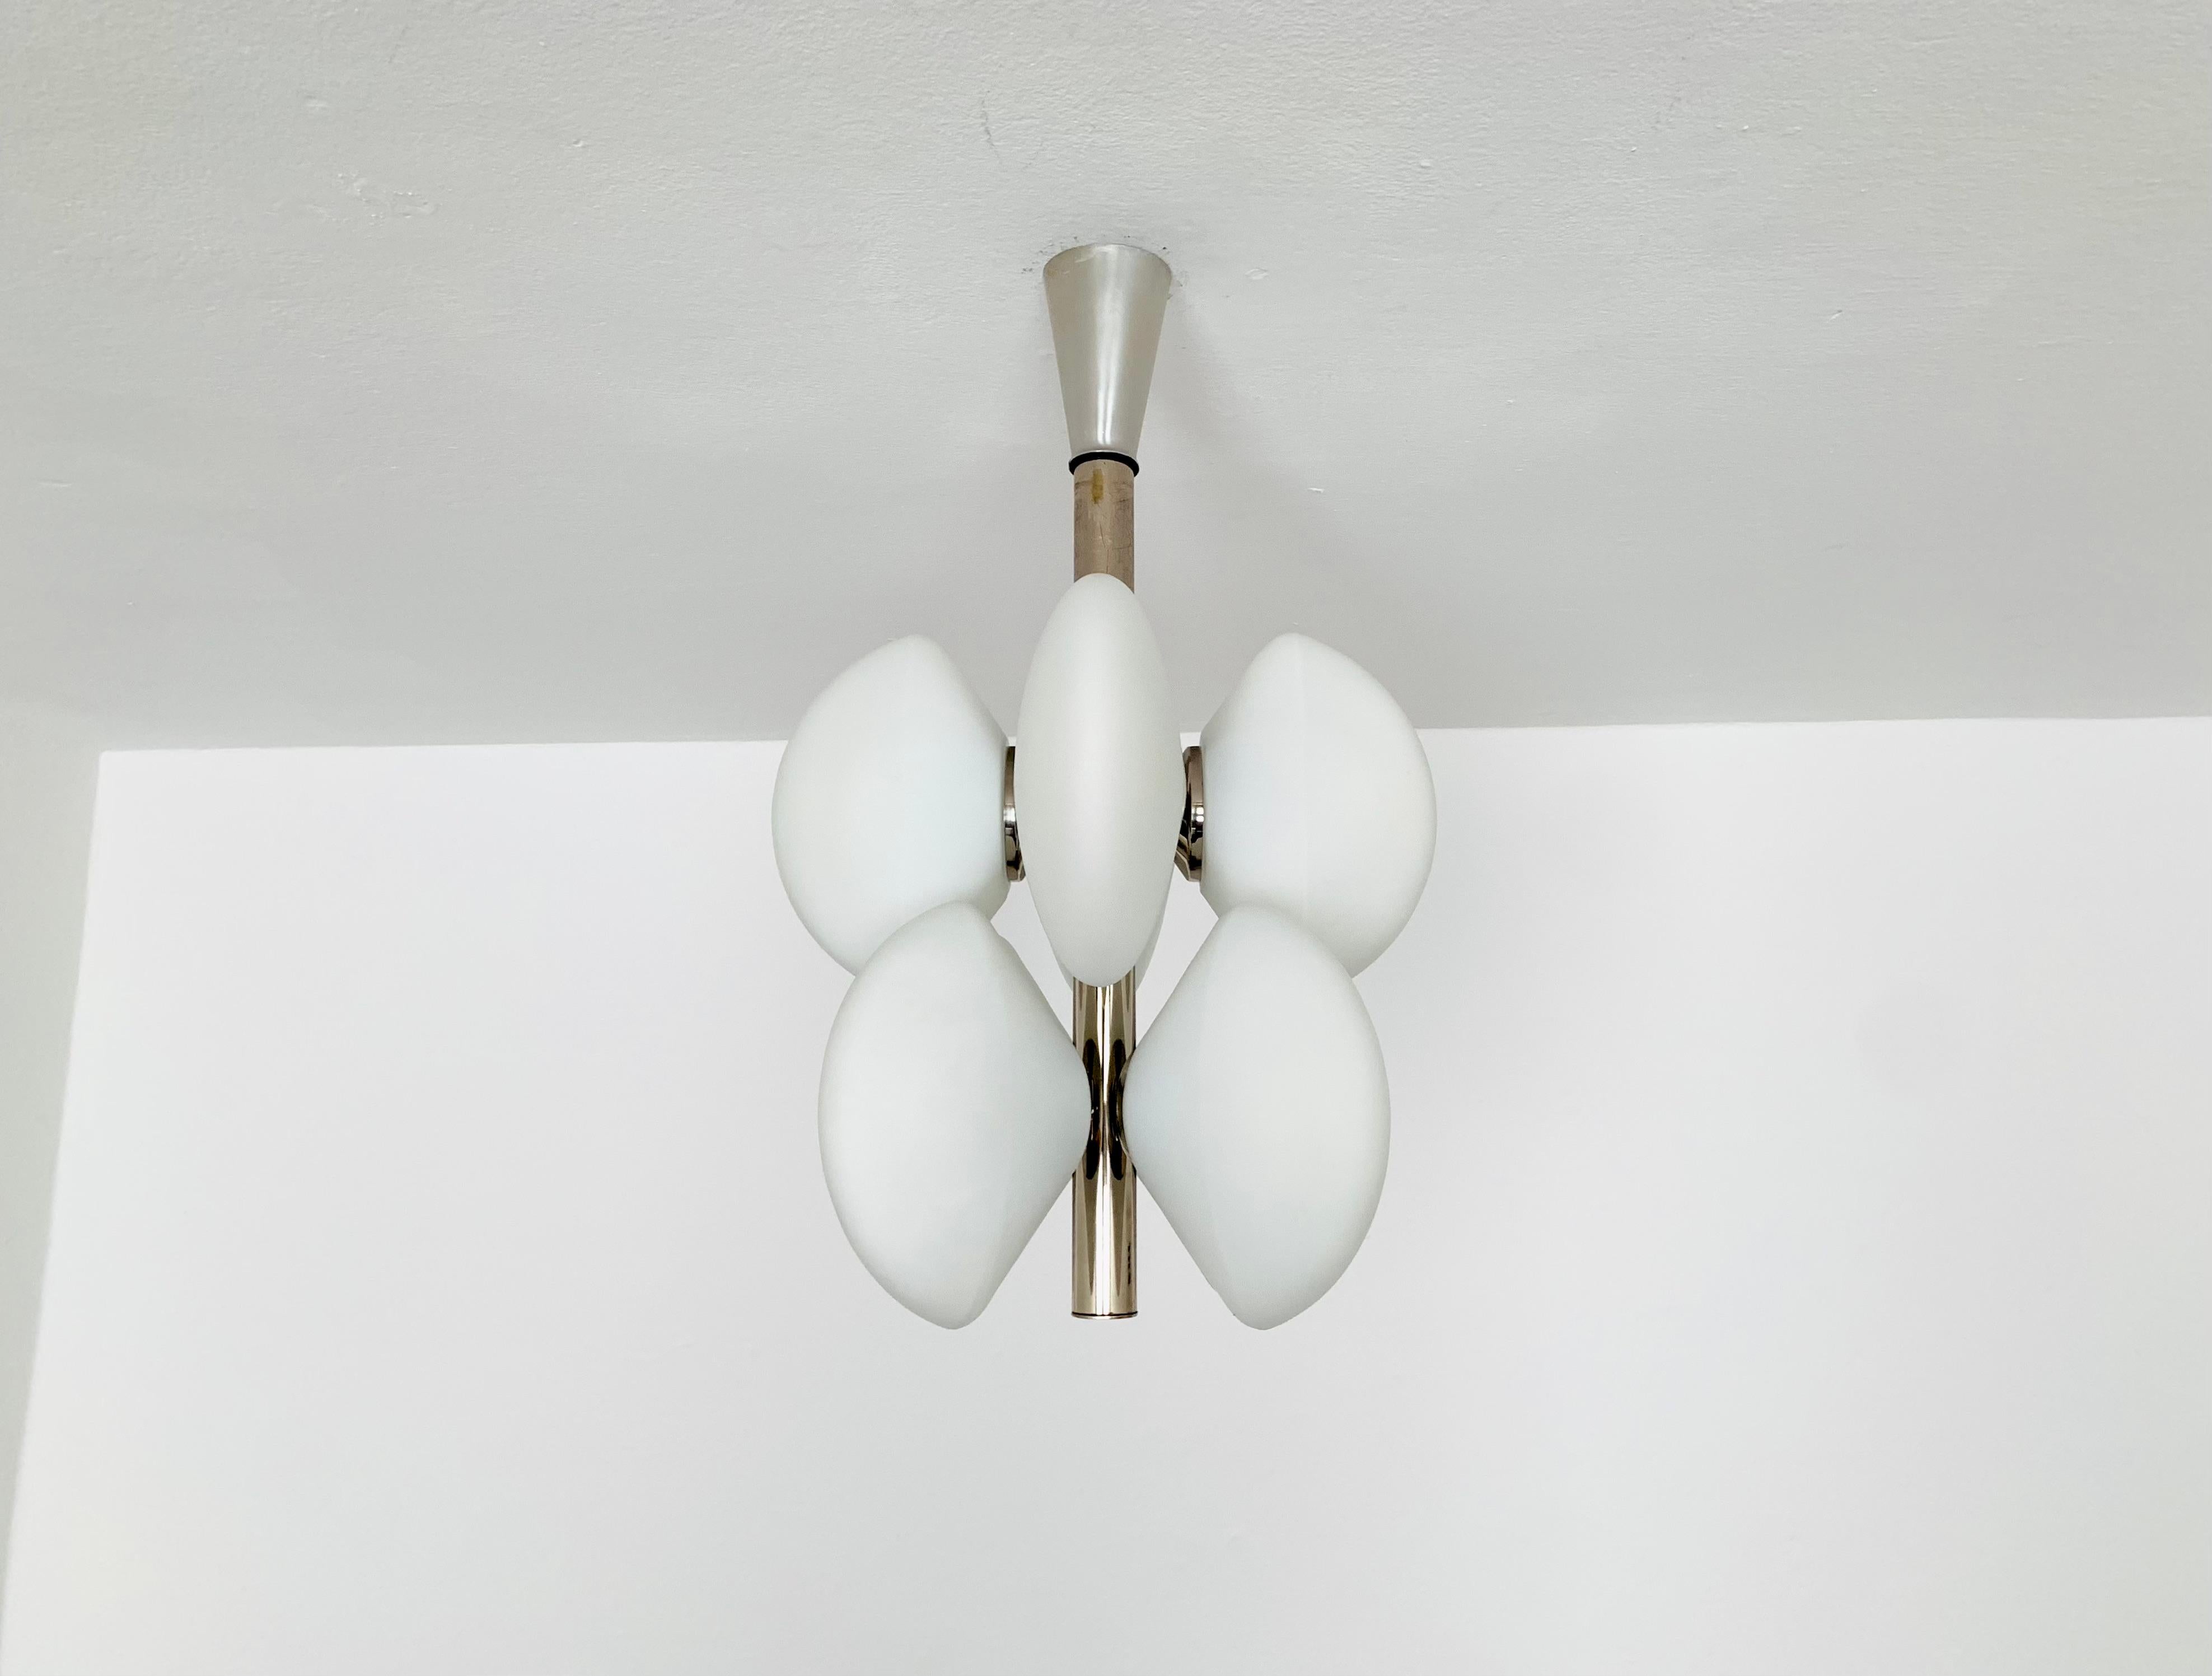 Chromed Sputnik chandelier from the 1960s.
The 8 specially shaped opal glass lampshades spread a pleasant light.
The lamp has a very high quality finish.
Very contemporary design with a fantastic look.

Condition:

Very good vintage condition